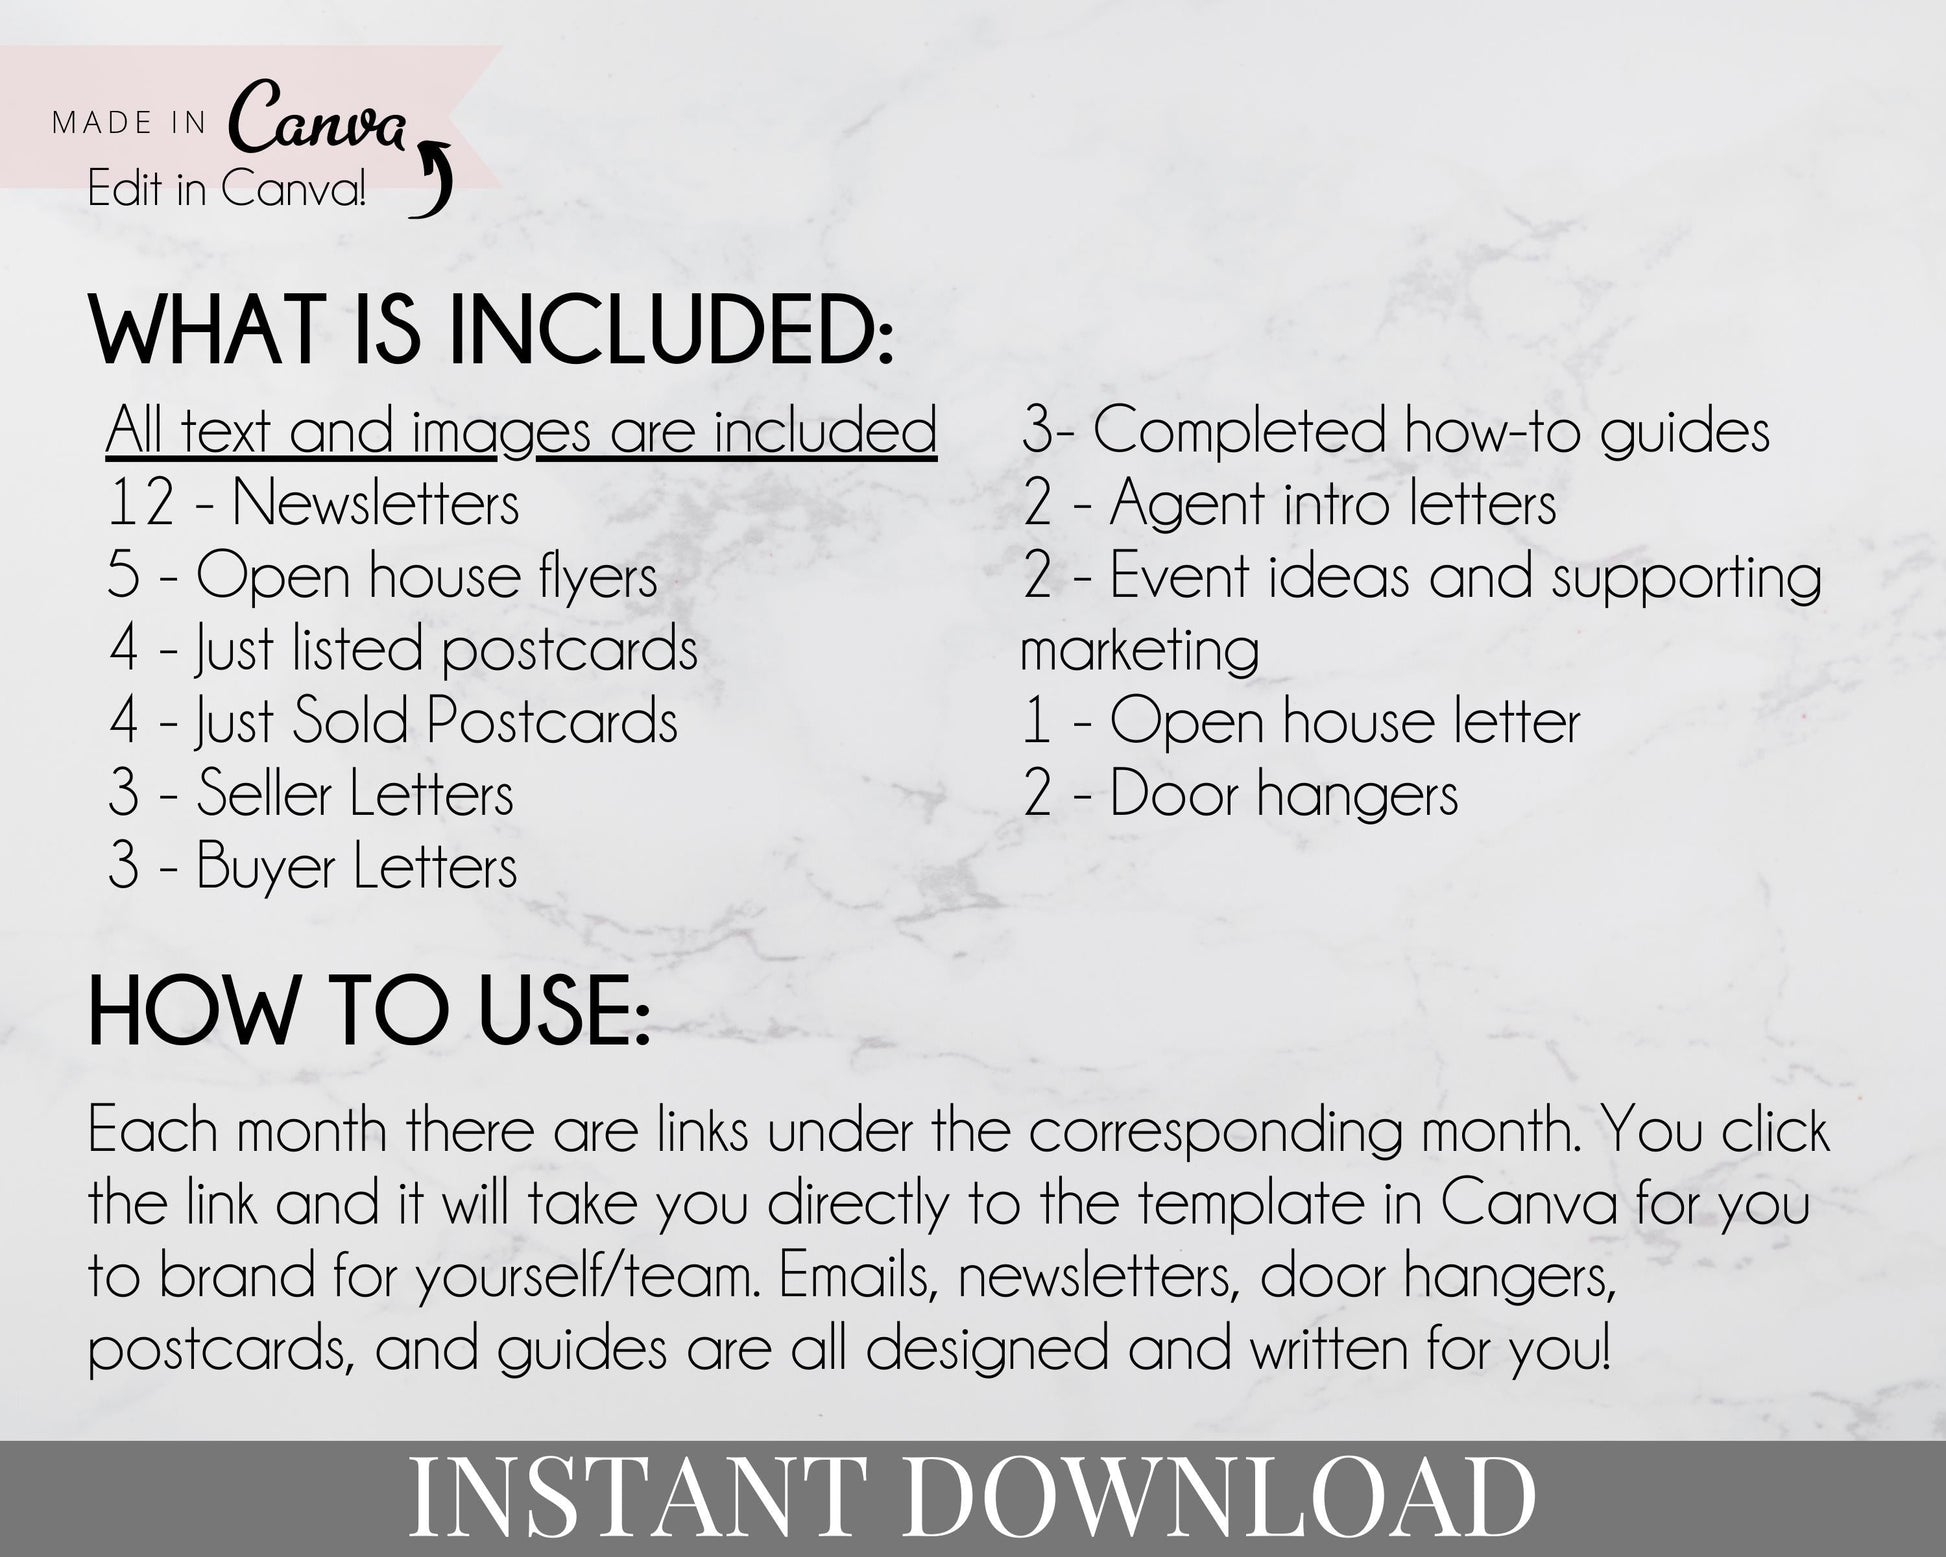 Real Estate Farming Kit Marketing for Realtors, Agents - Instant Download - Open House Templates